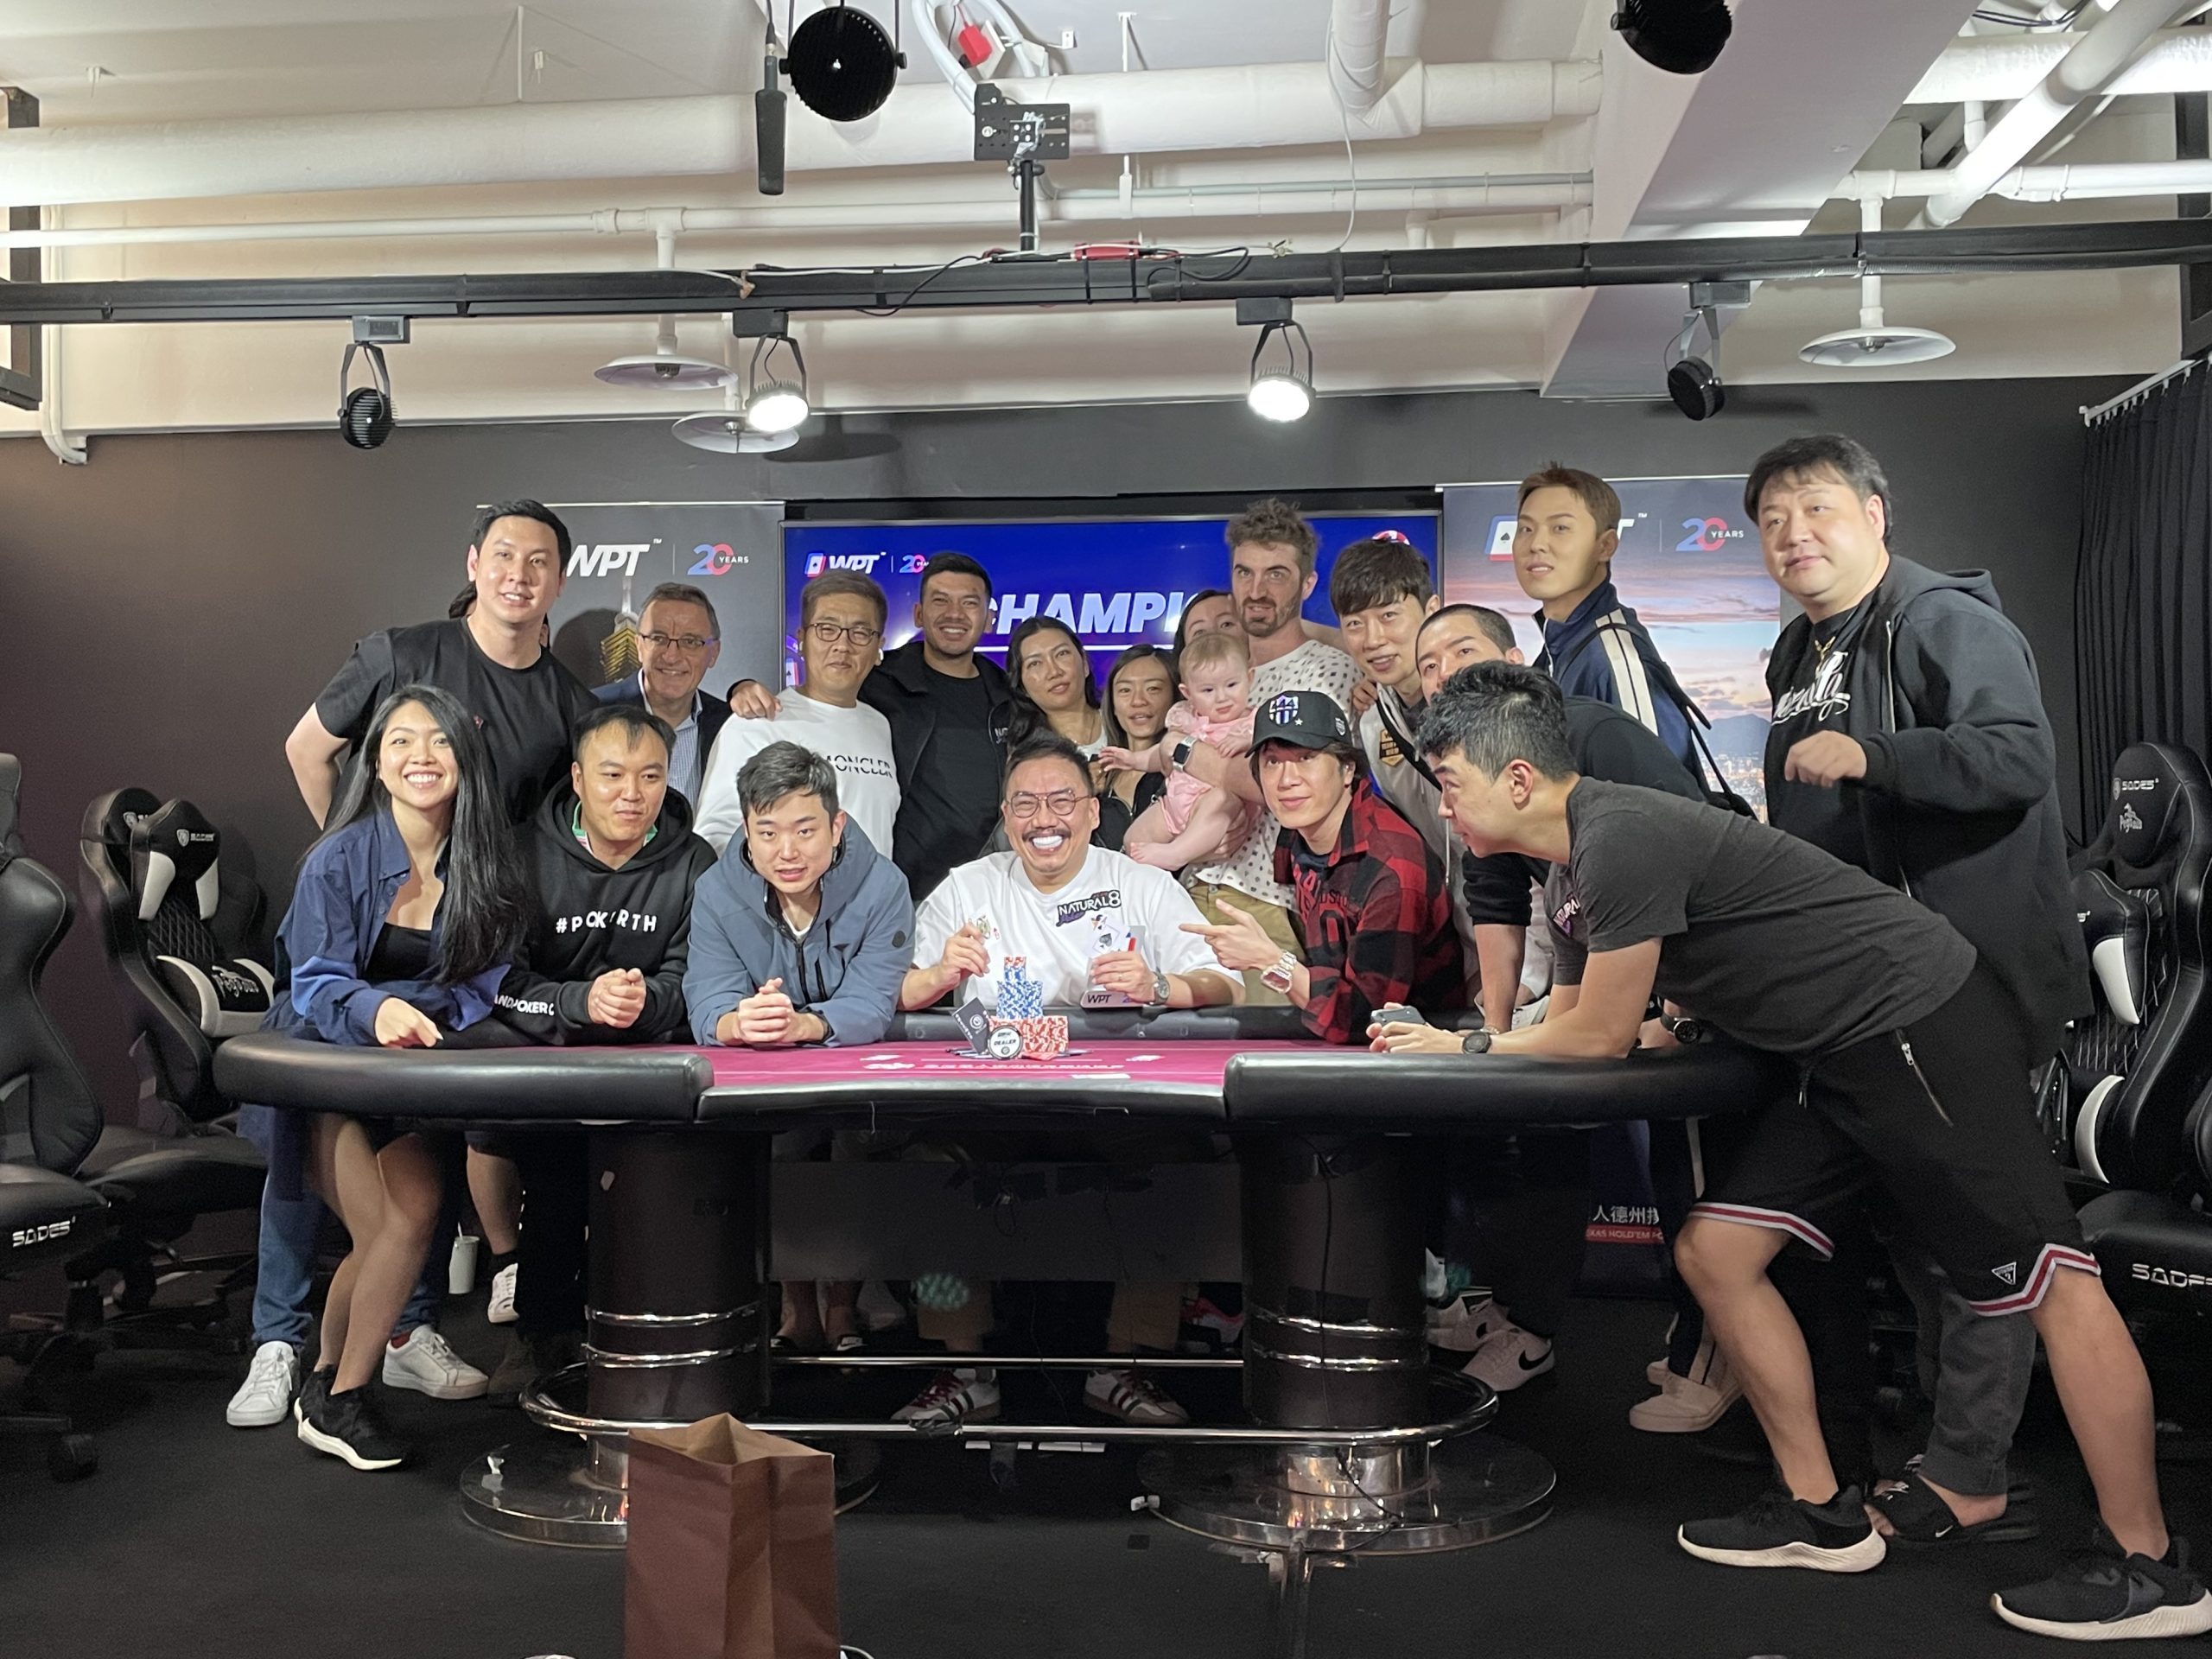 WPT Prime Taiwan: Victor Chong clinches the Bounty Event; Pi Ying Hsu, Takao Shimizu, Chung Liang Kuo win trophies; SHR Day 1 update